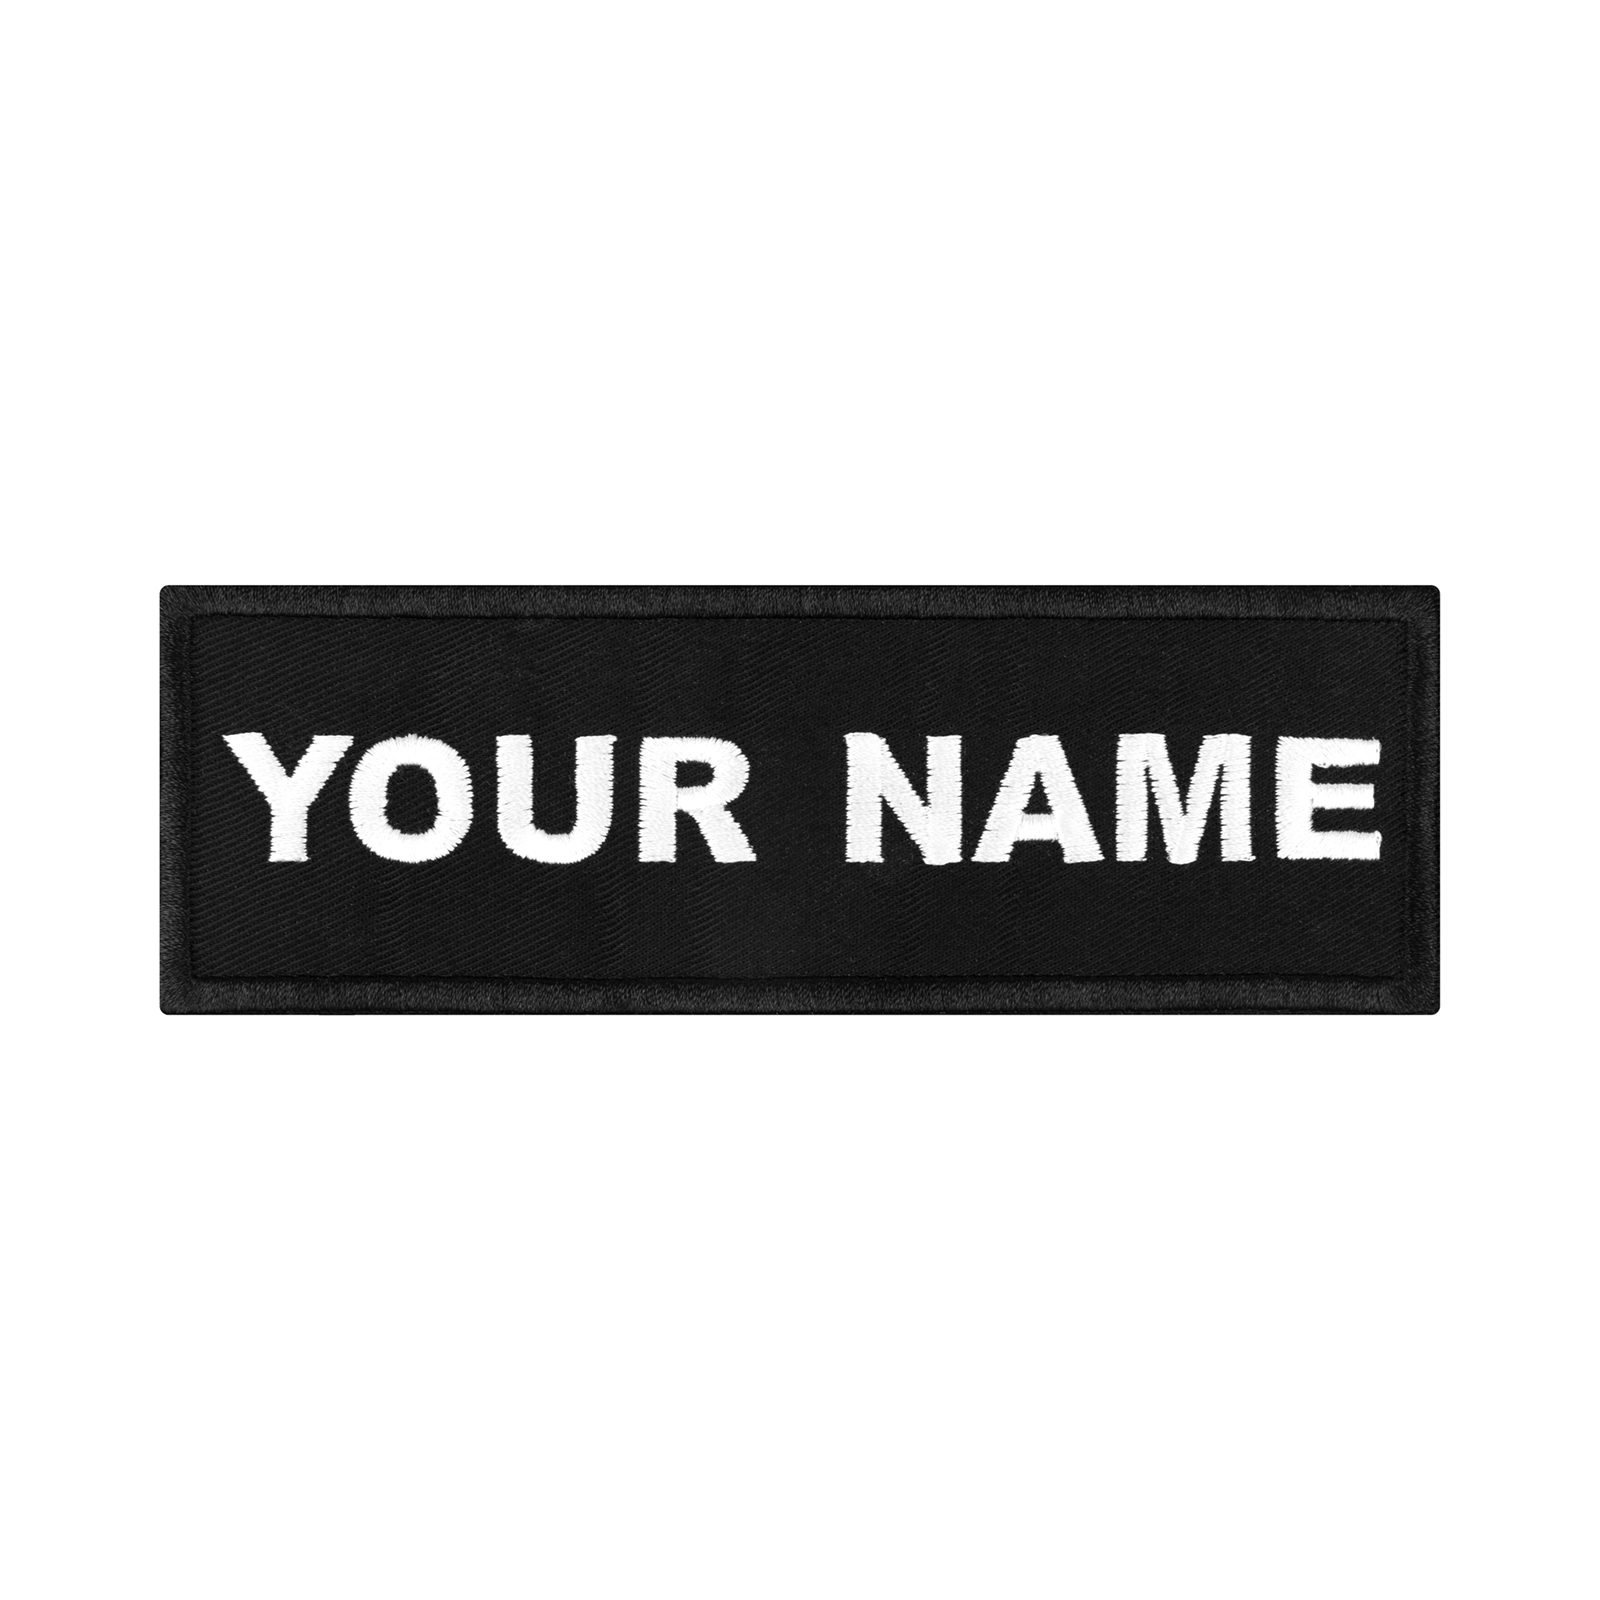 Muka 10 Pcs Personalized Embroidered Name Patches Customized Text & Logo  for Uniform / Work Shirt / Clothing / Bags / Vest Sale, Reviews. - Opentip